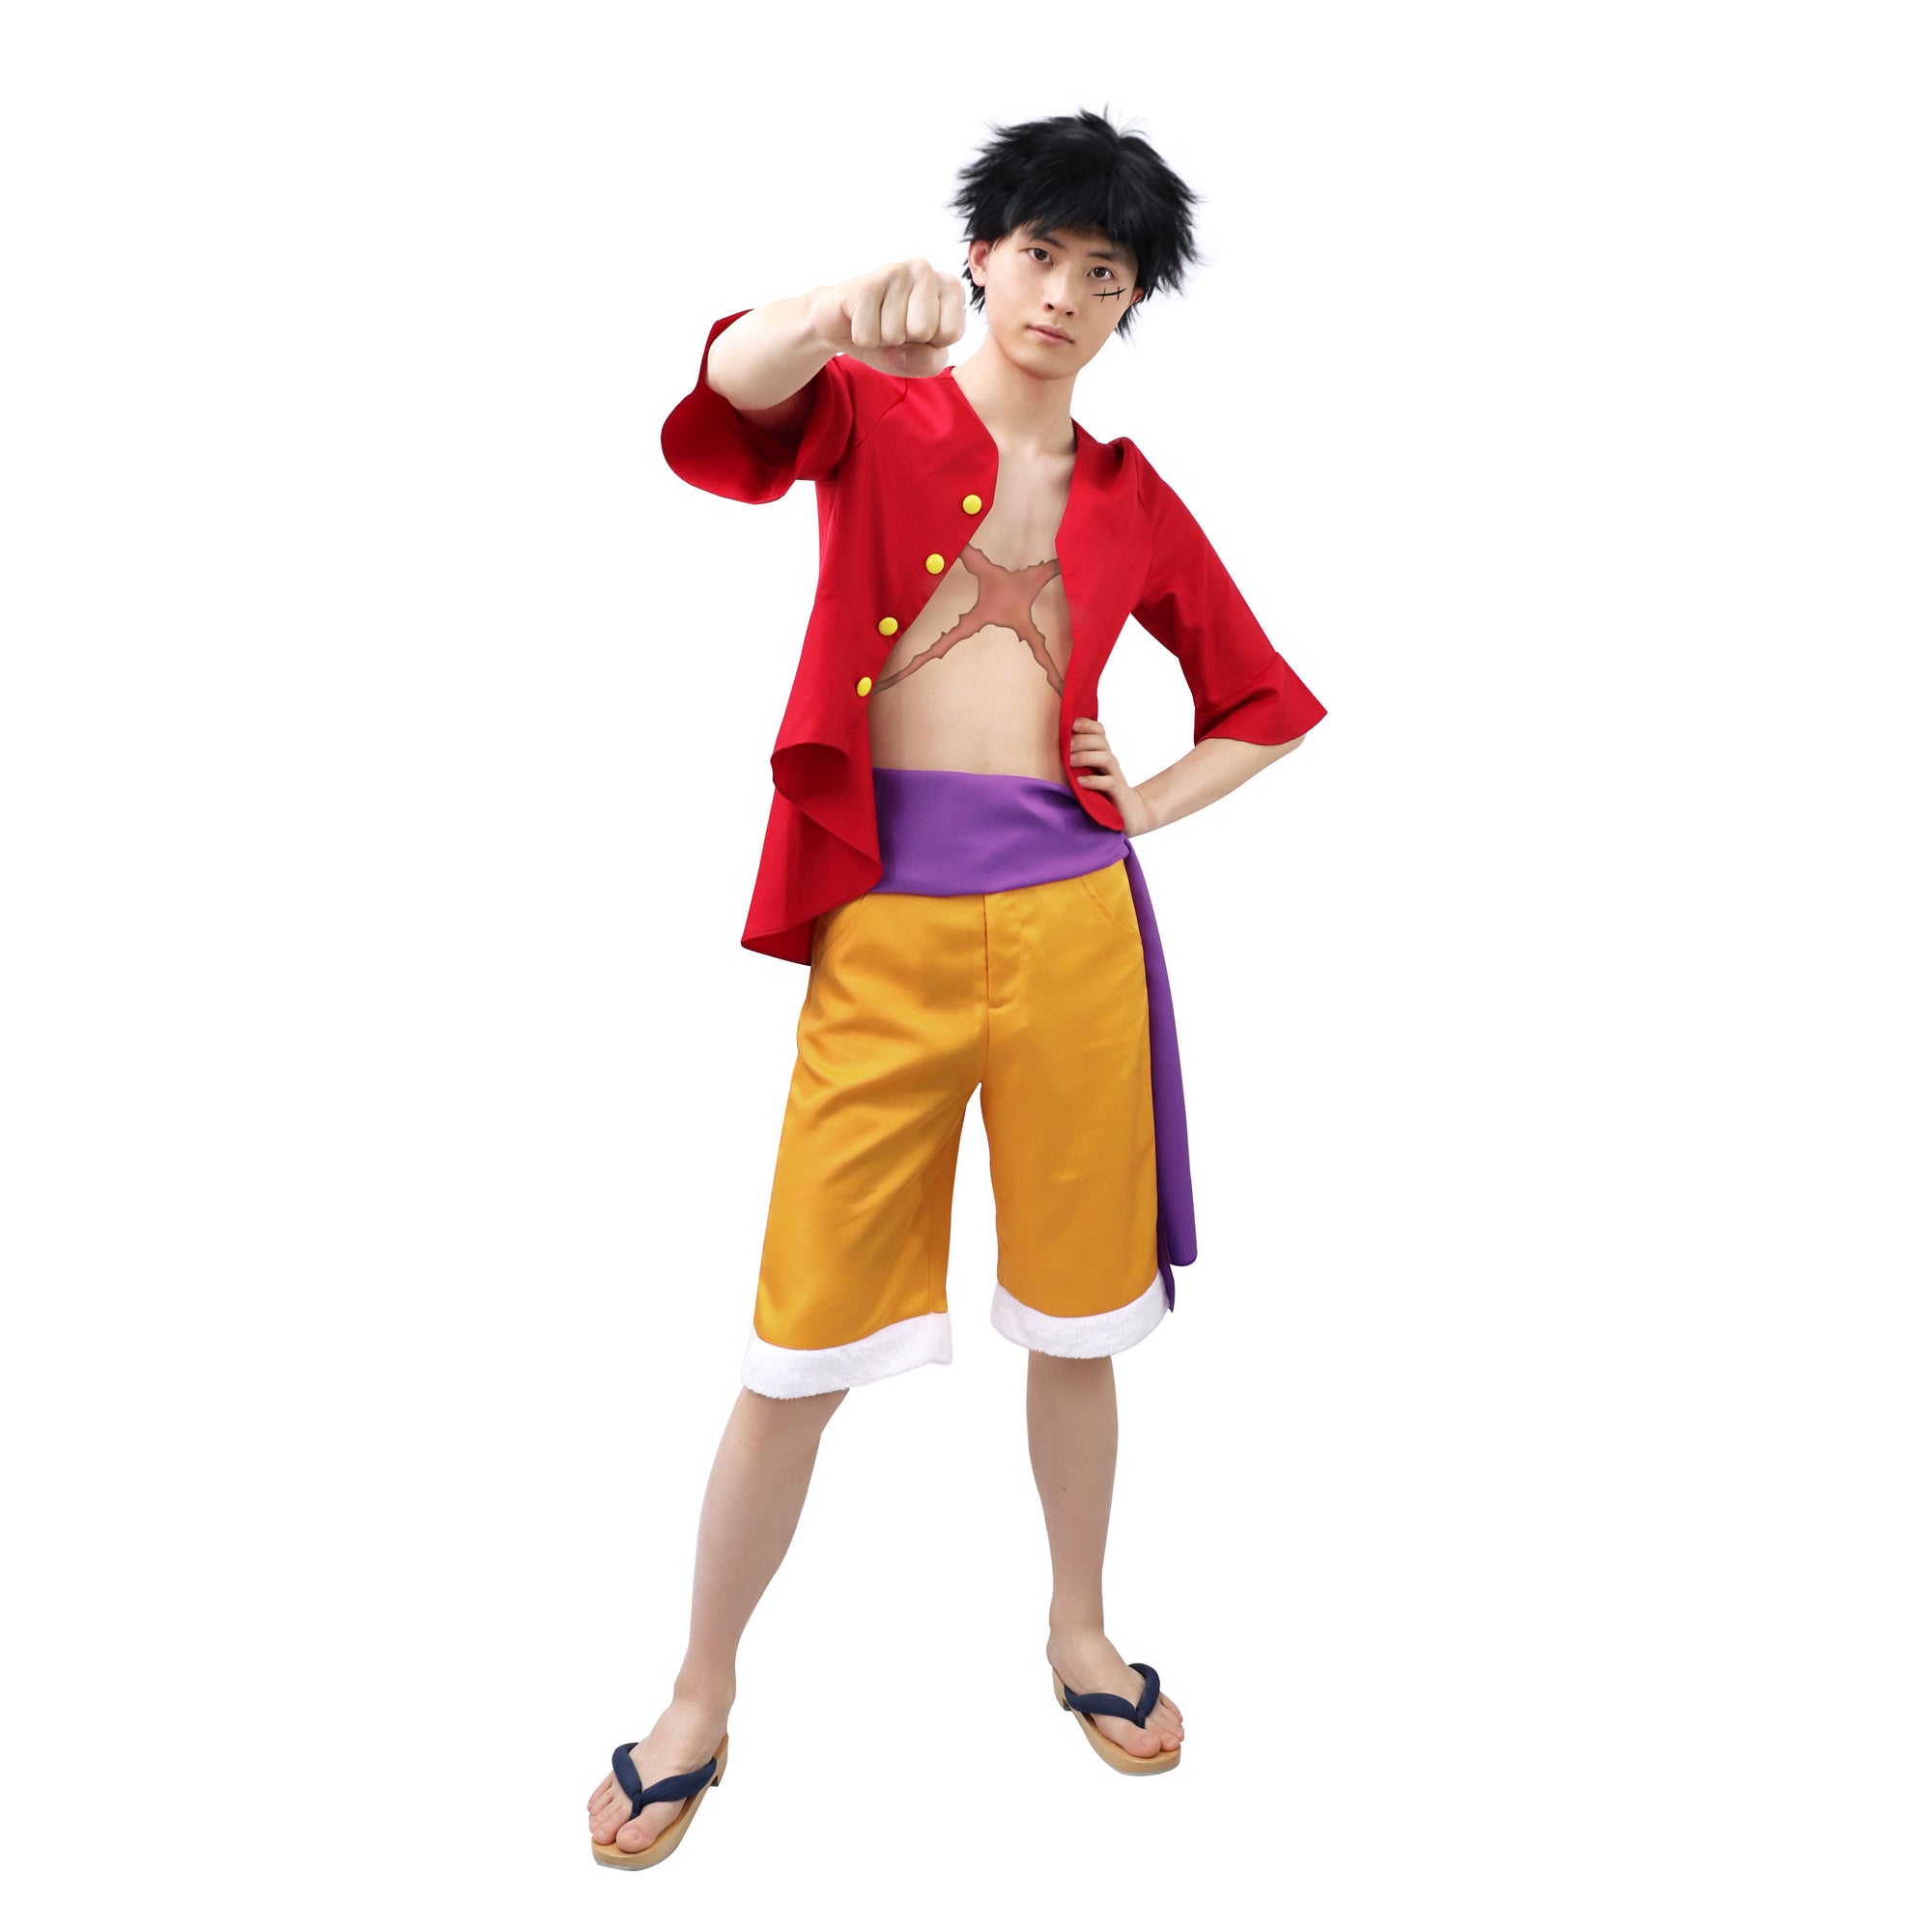 ONE PIECE Monkey D Luffy Costume Kids Luffy Red Shirt Cosplay Wano Outfits  Dress Up for Halloween Comic Con for Adult Kids Toddler Boys 